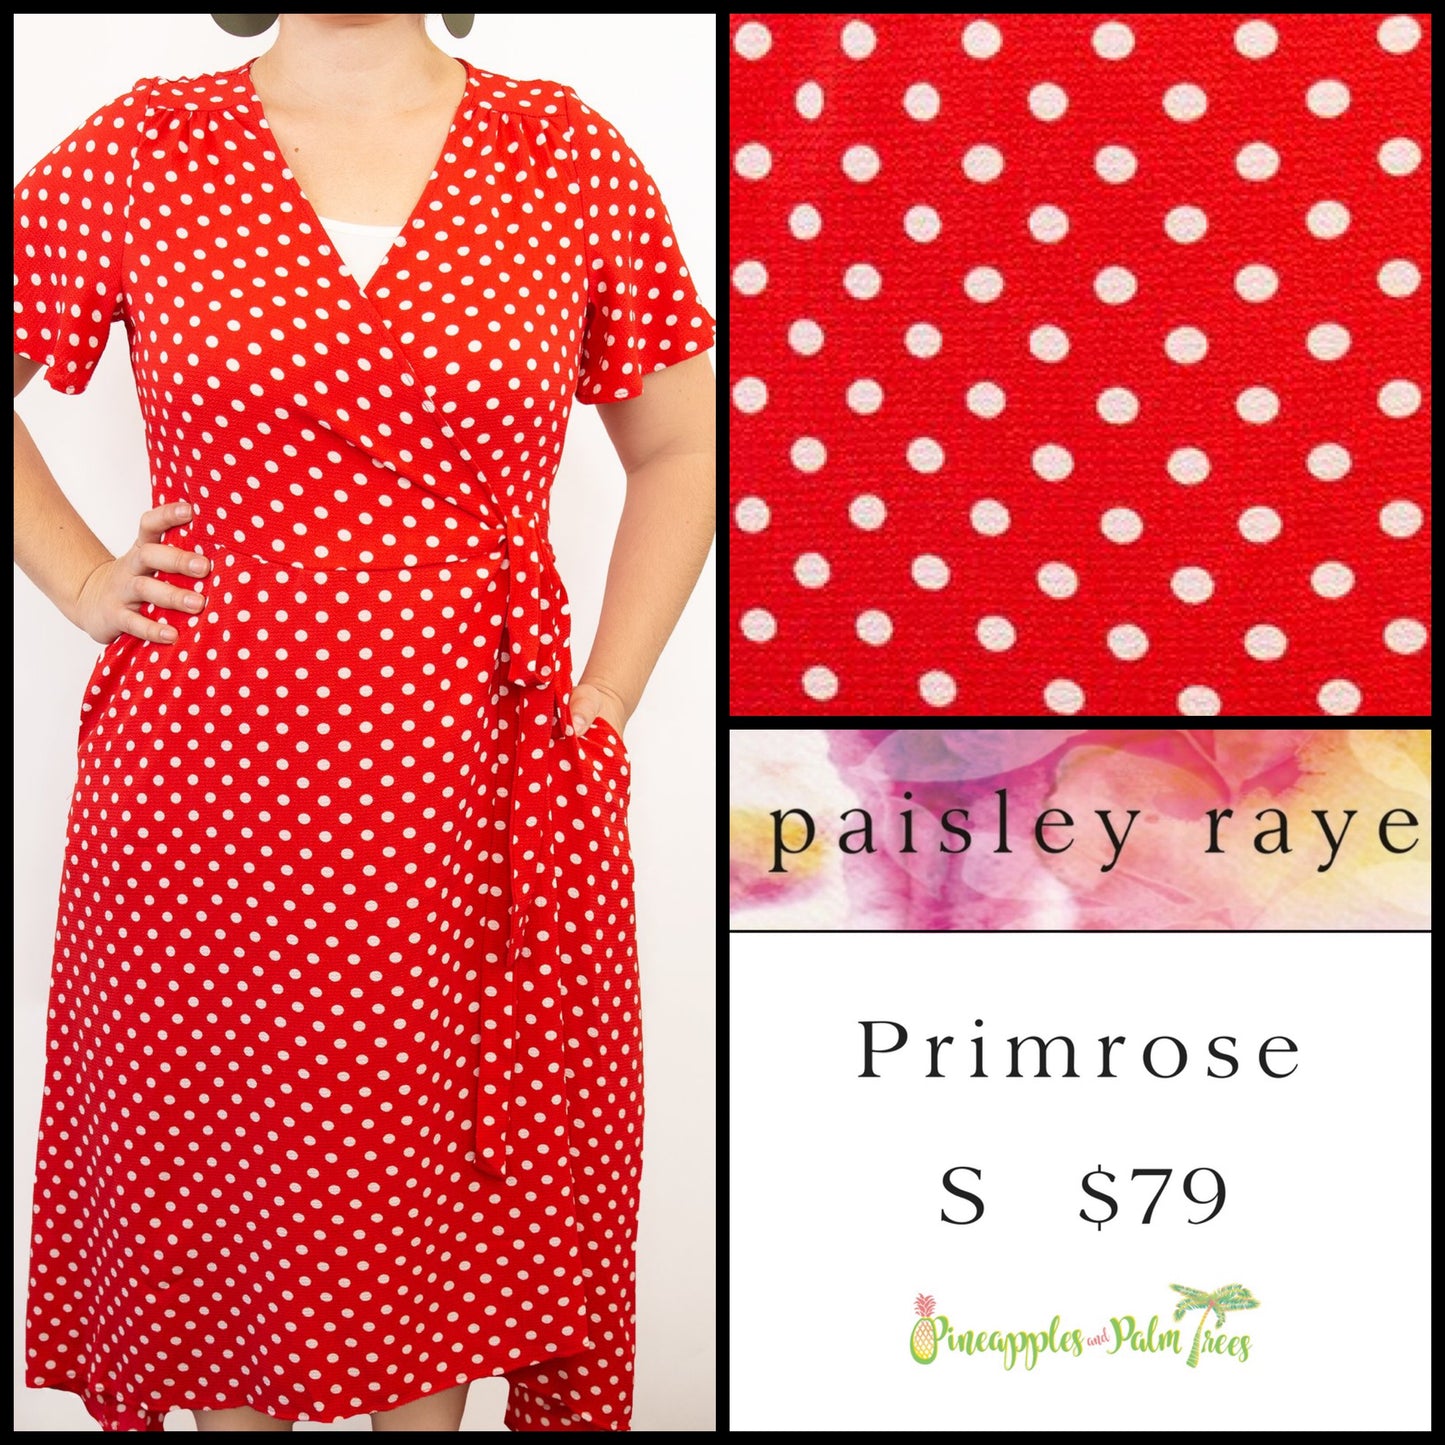 Dress: Primrose S - red and white polka dots